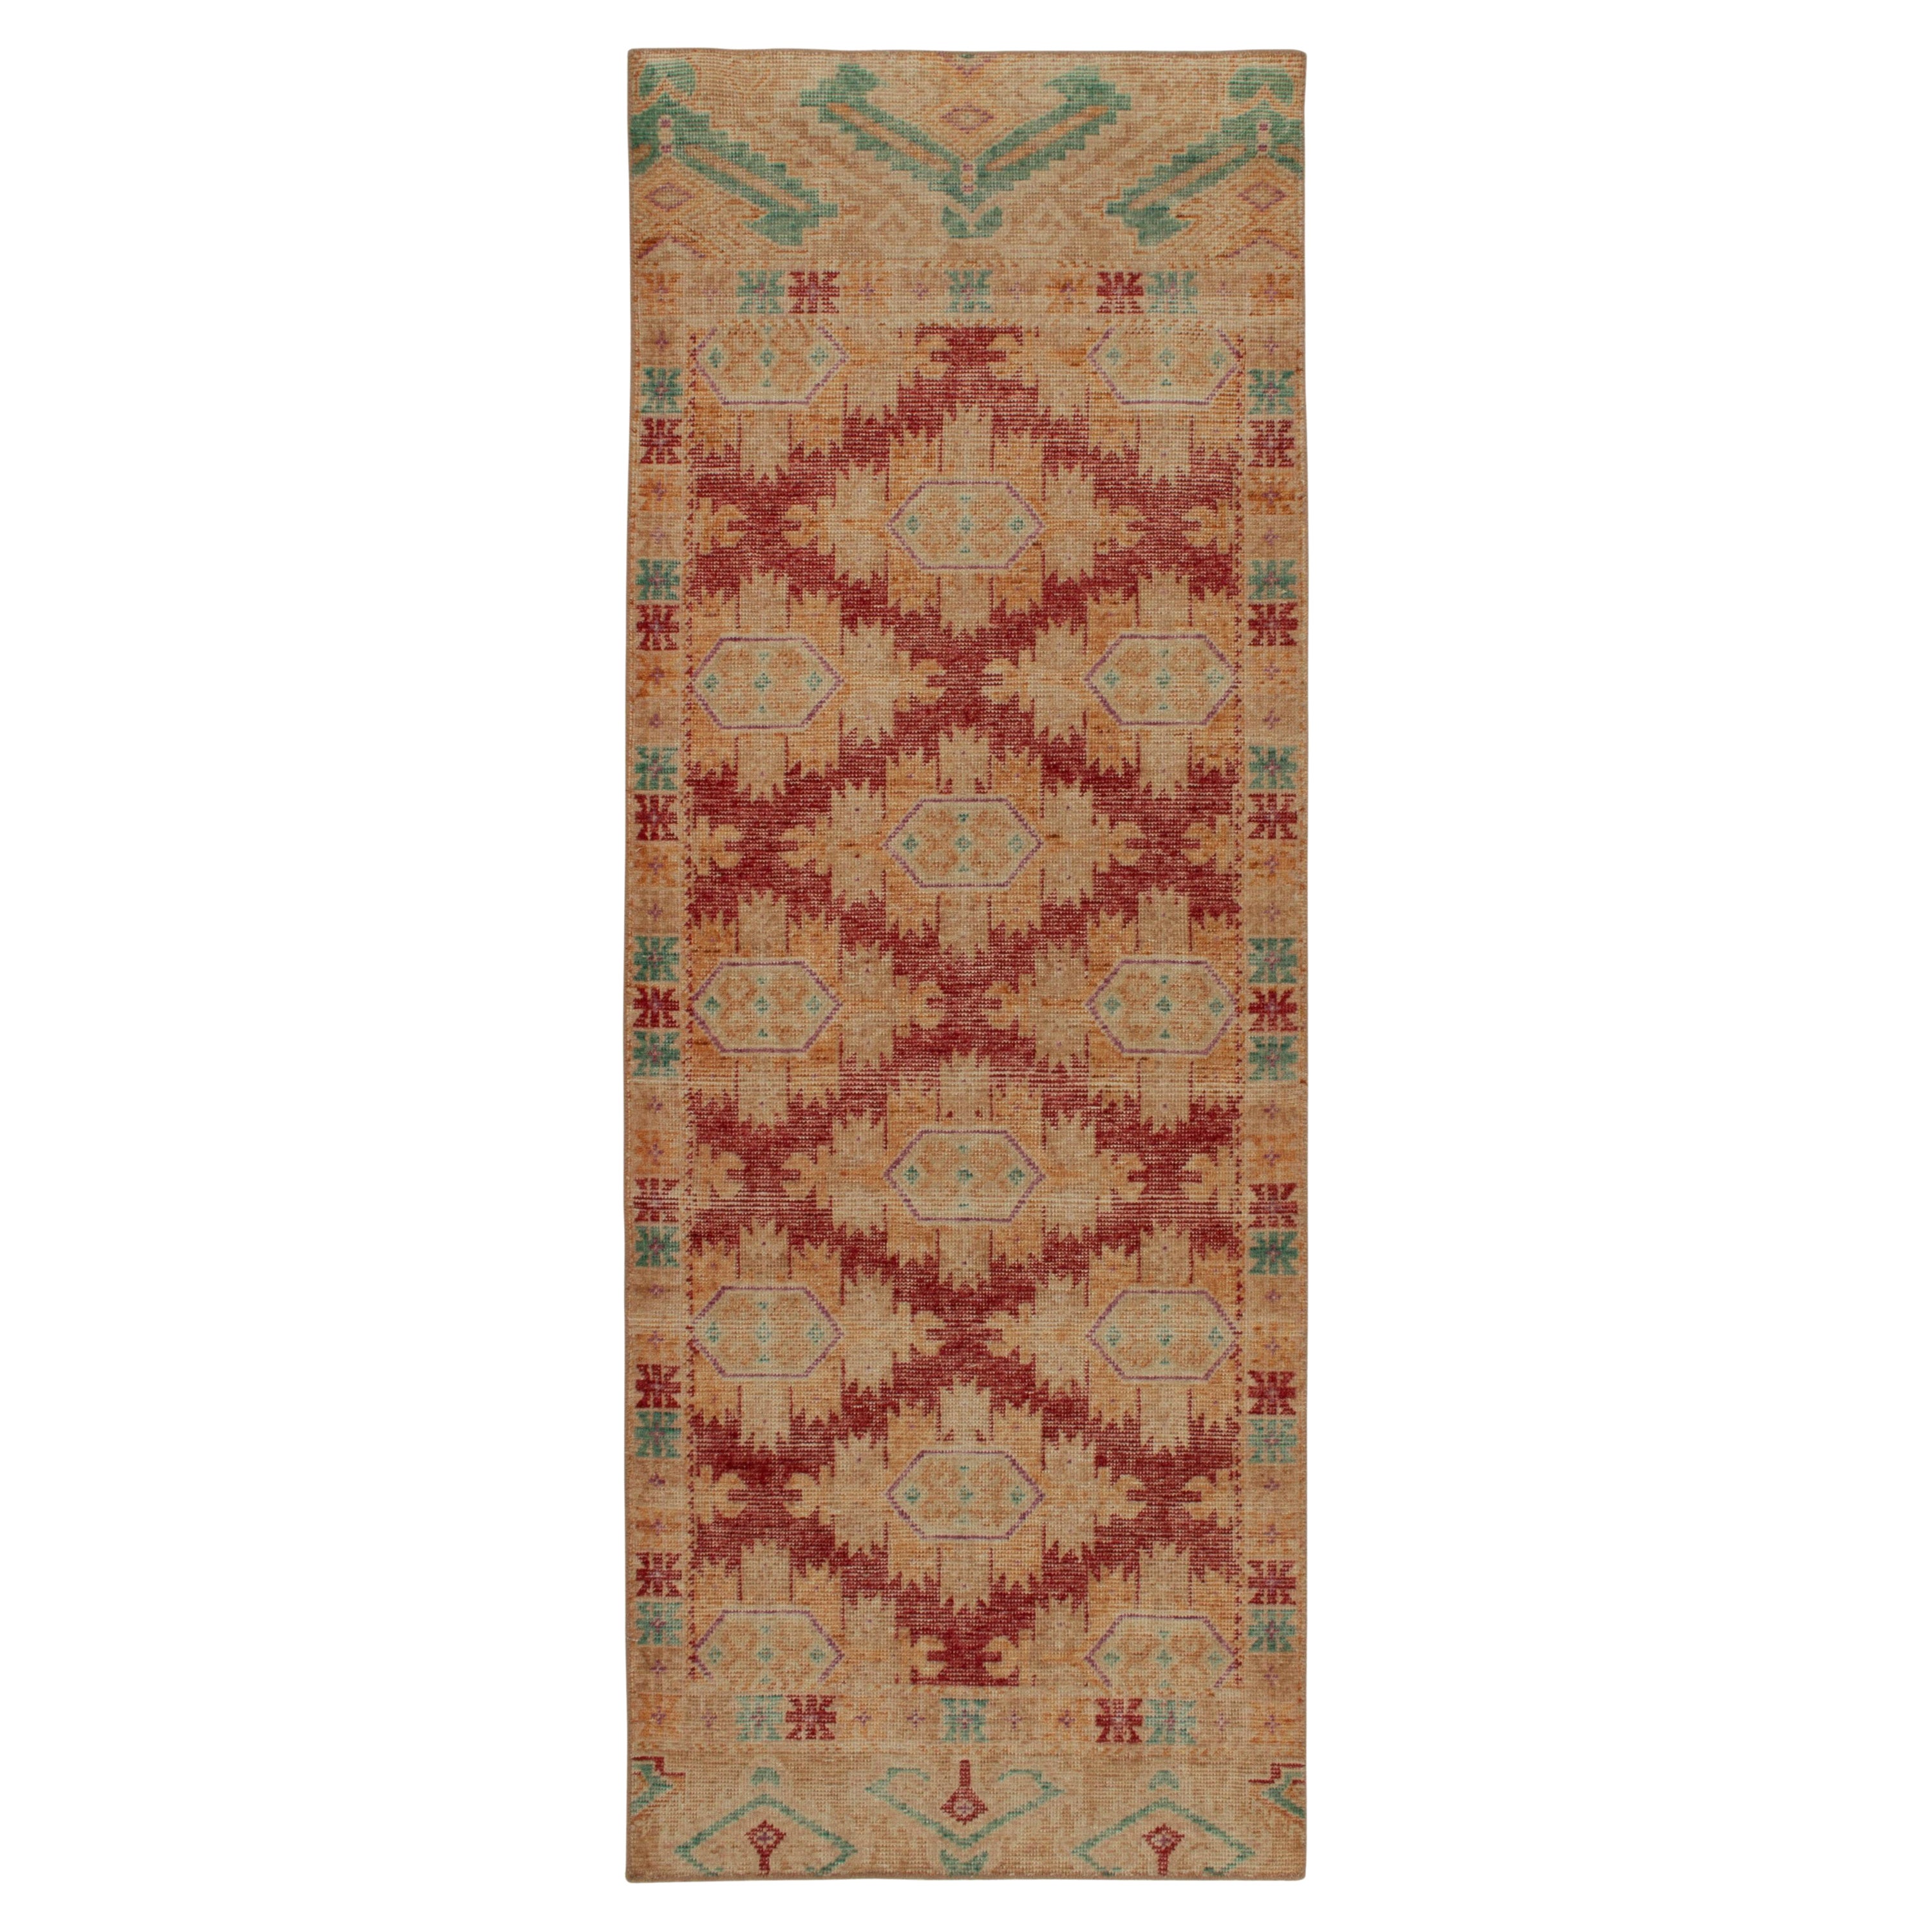 Tapis & Kilim's Distressed Bokhara Style Runner in Red, Beige & Gold Medallions (en anglais)